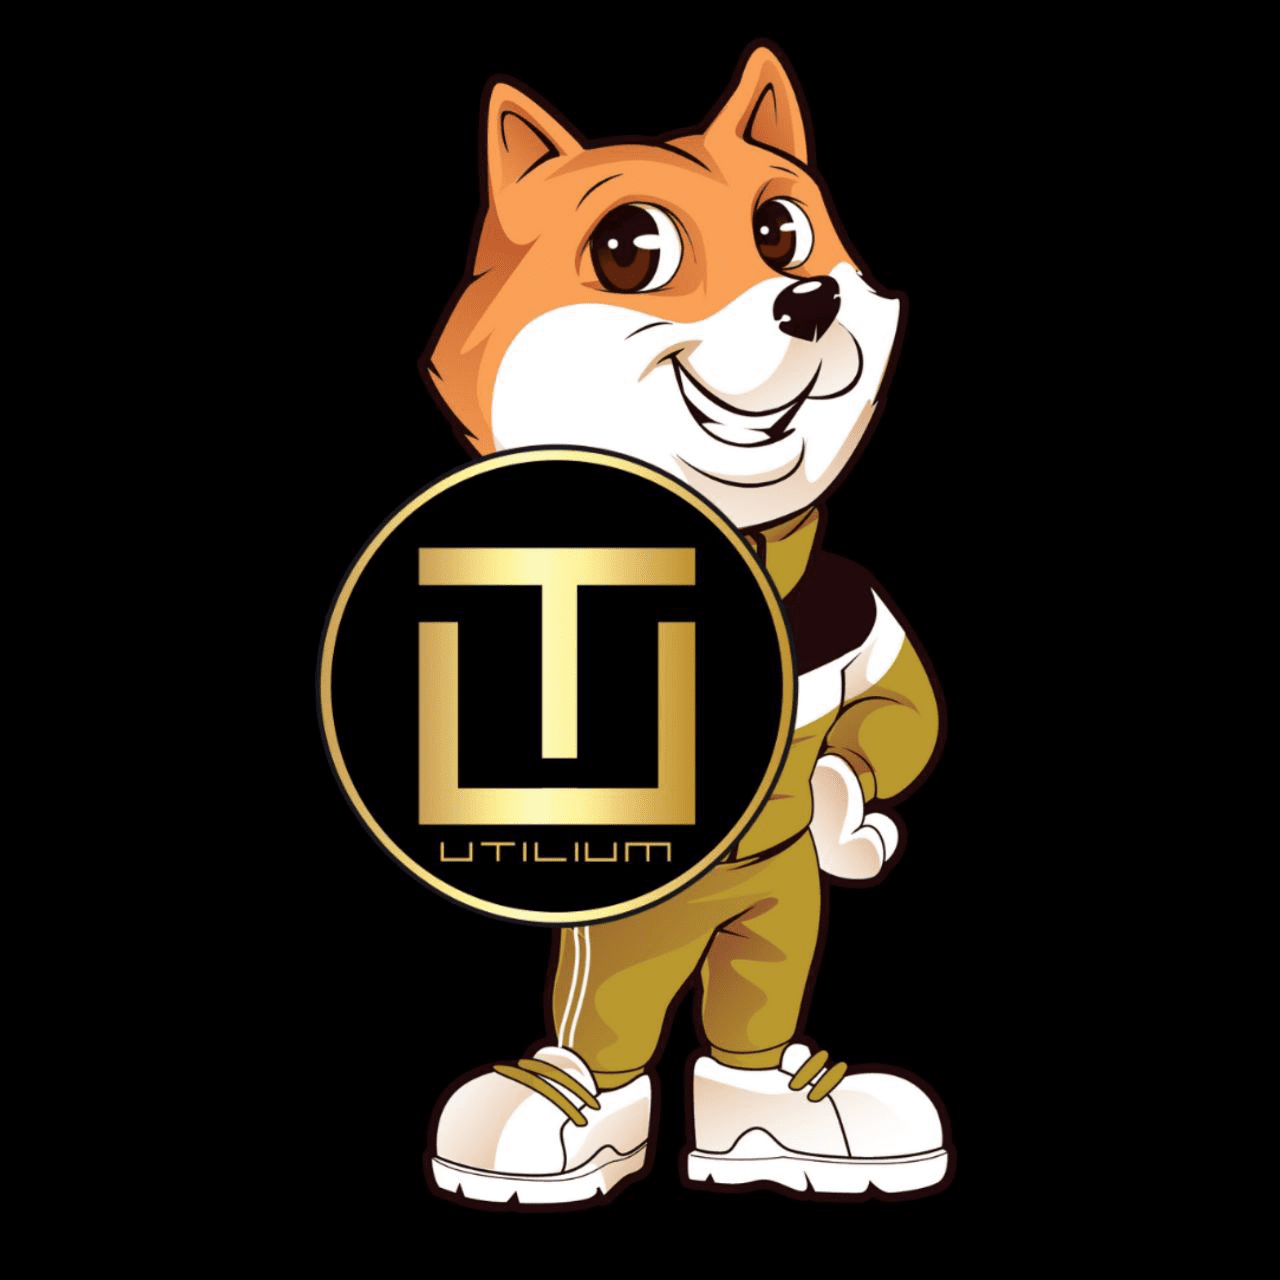 , Son of Doge launches its new platform, Utilium serving as a warehouse for most utilities.